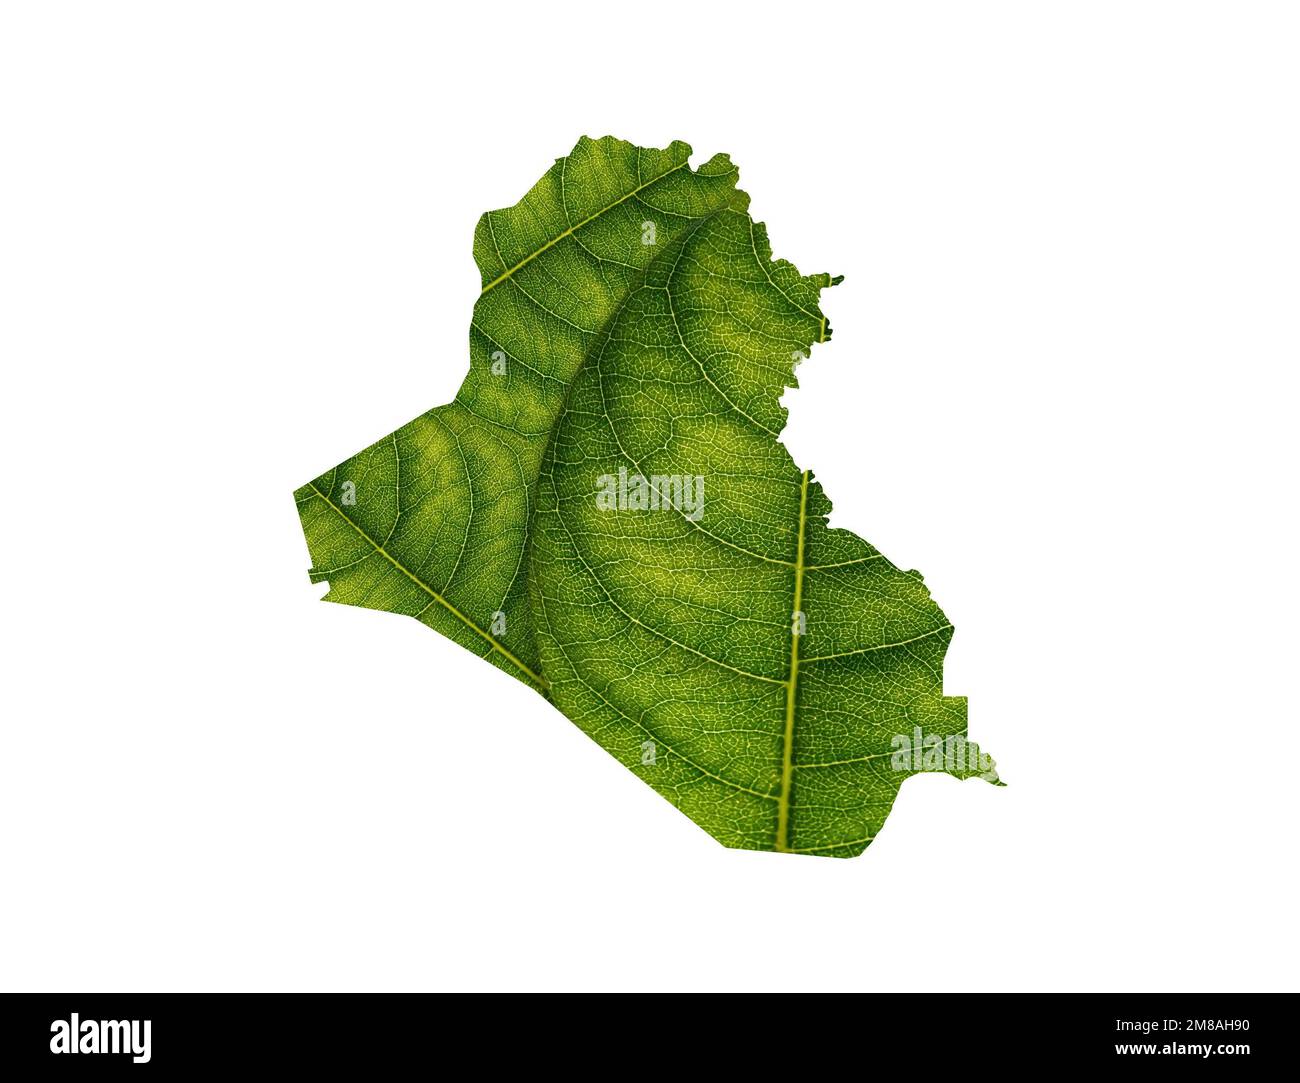 The Iraq map made of green leaves isolated on white background, ecology concept Stock Photo